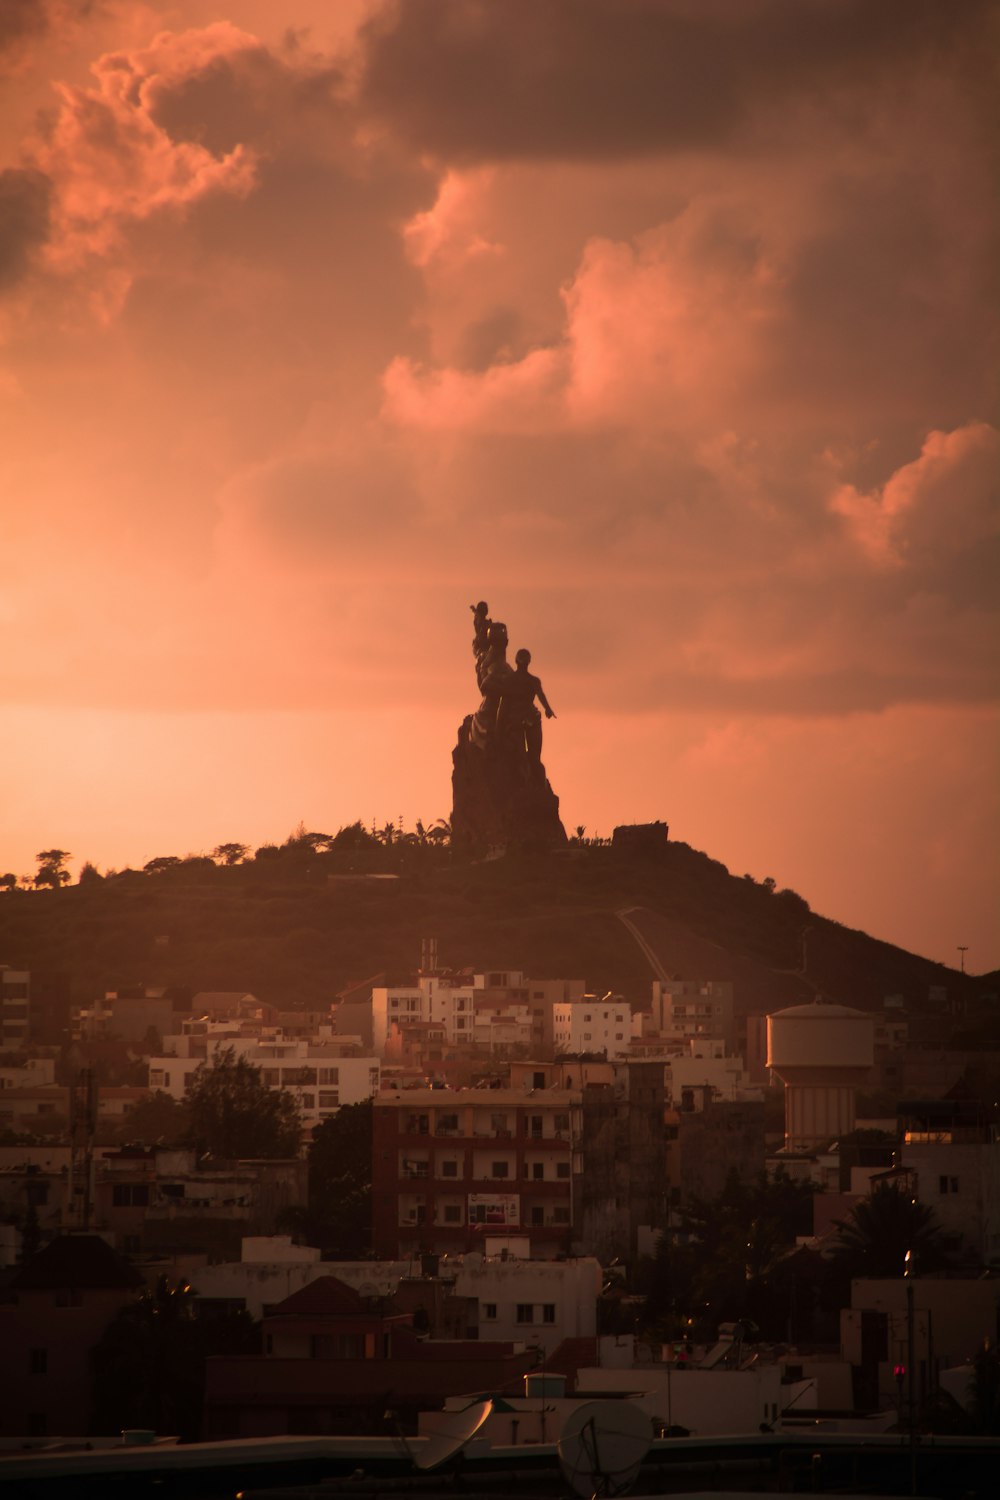 a view of a hill with a statue on top of it